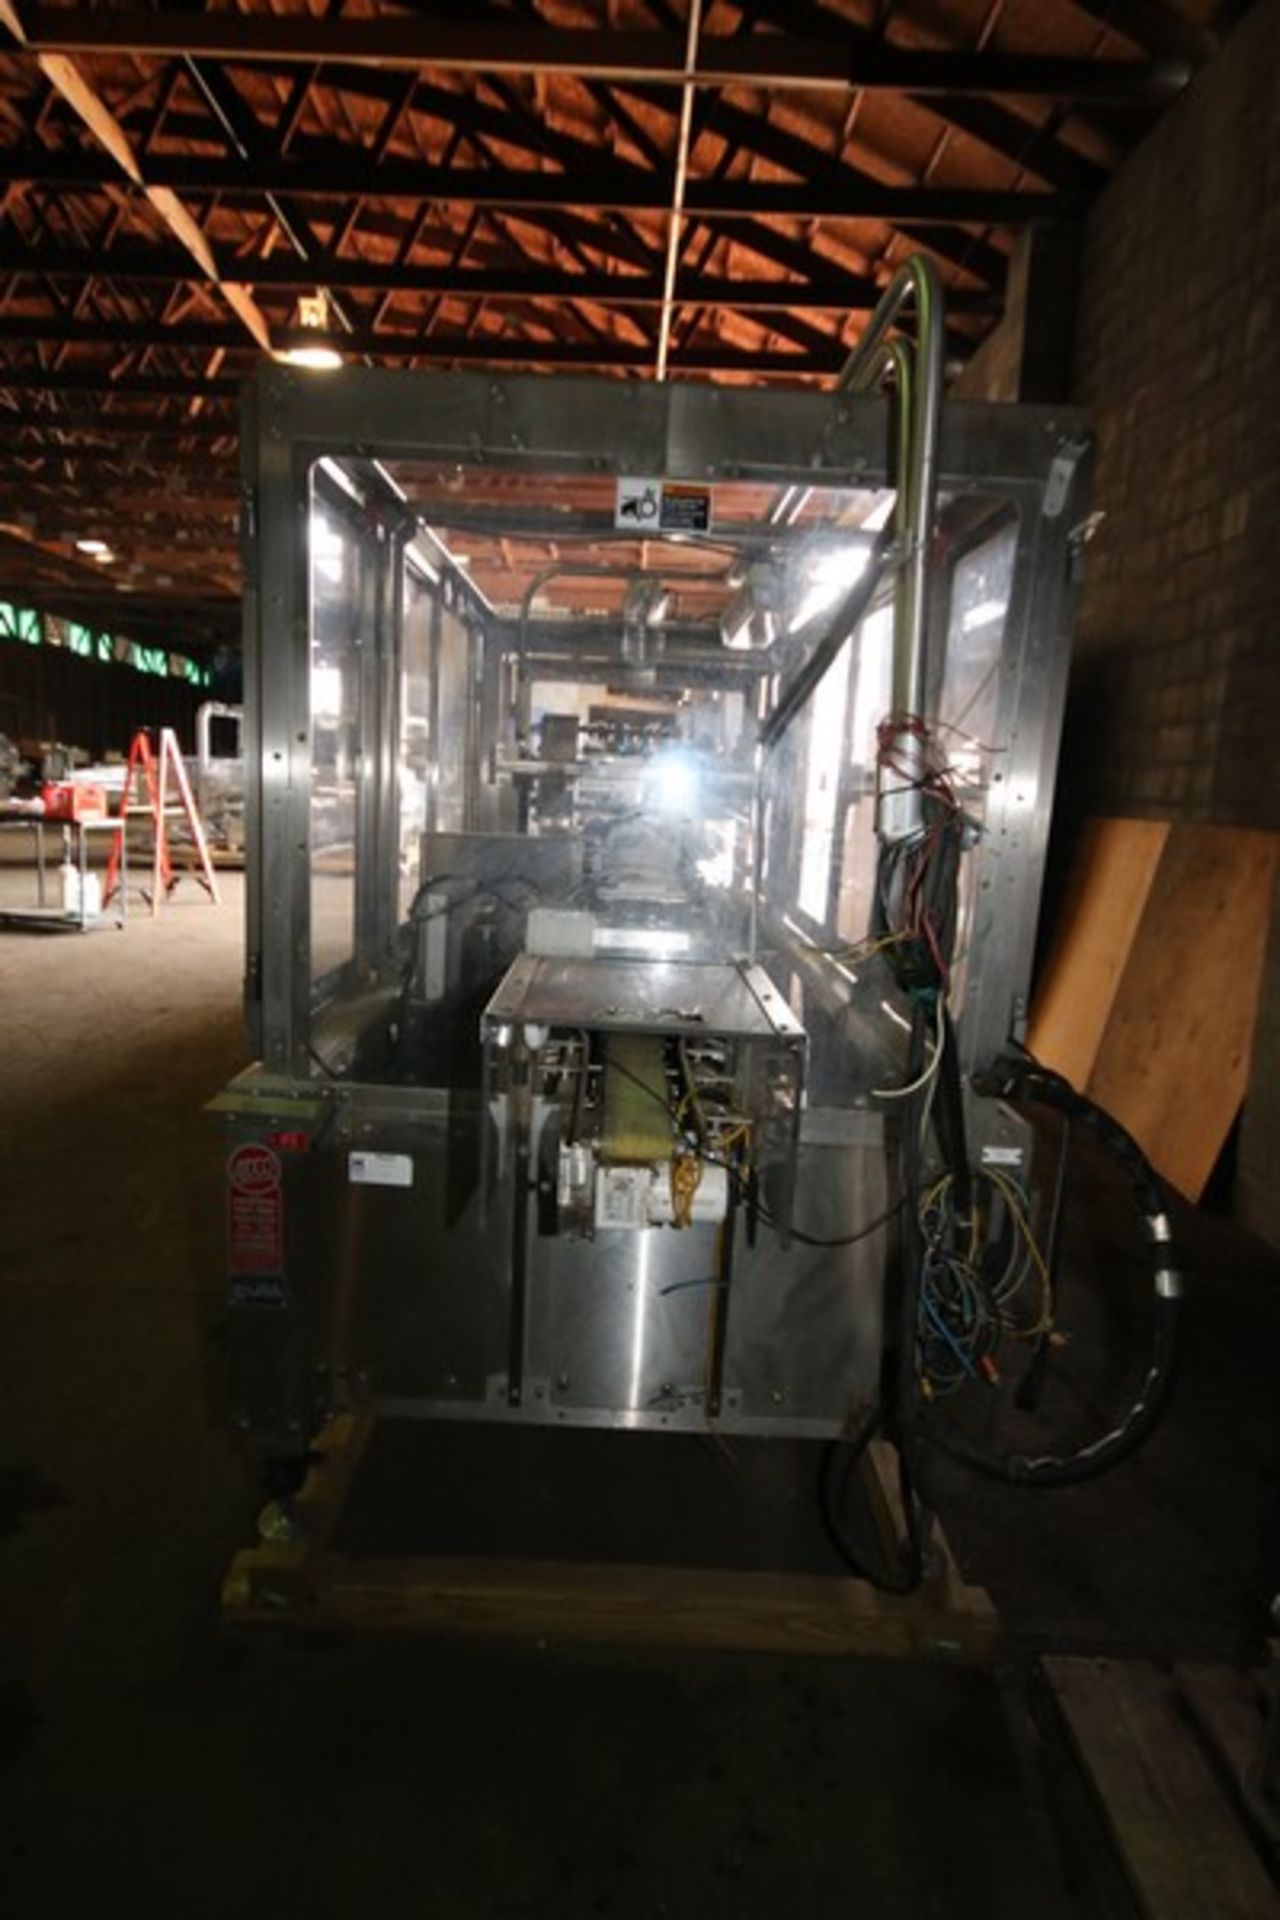 Adco Wrap Around Sleever, M/N 12WAS-2DO-WD, S/N 5172H2, 480 Volts, 3 Phase, with In Feed Conveyor - Image 5 of 15